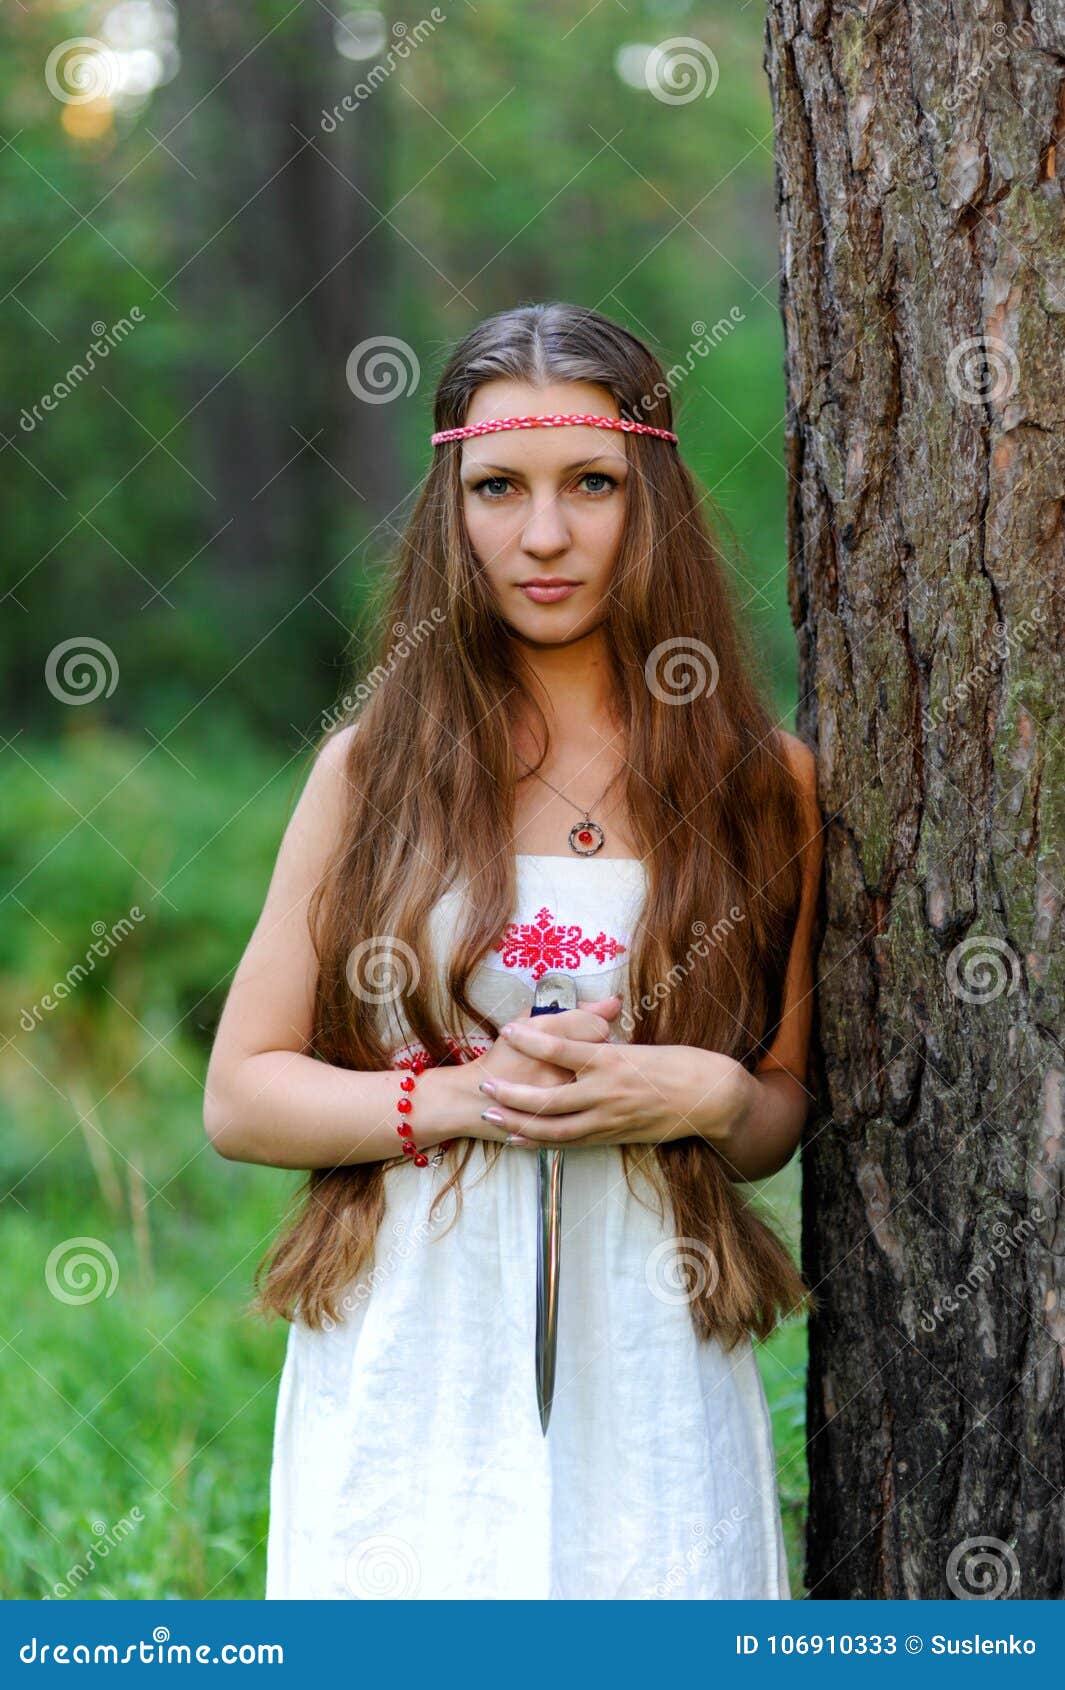 A Young Beautiful Slavic Girl with Long Hair and Slavic Ethnic Dress ...